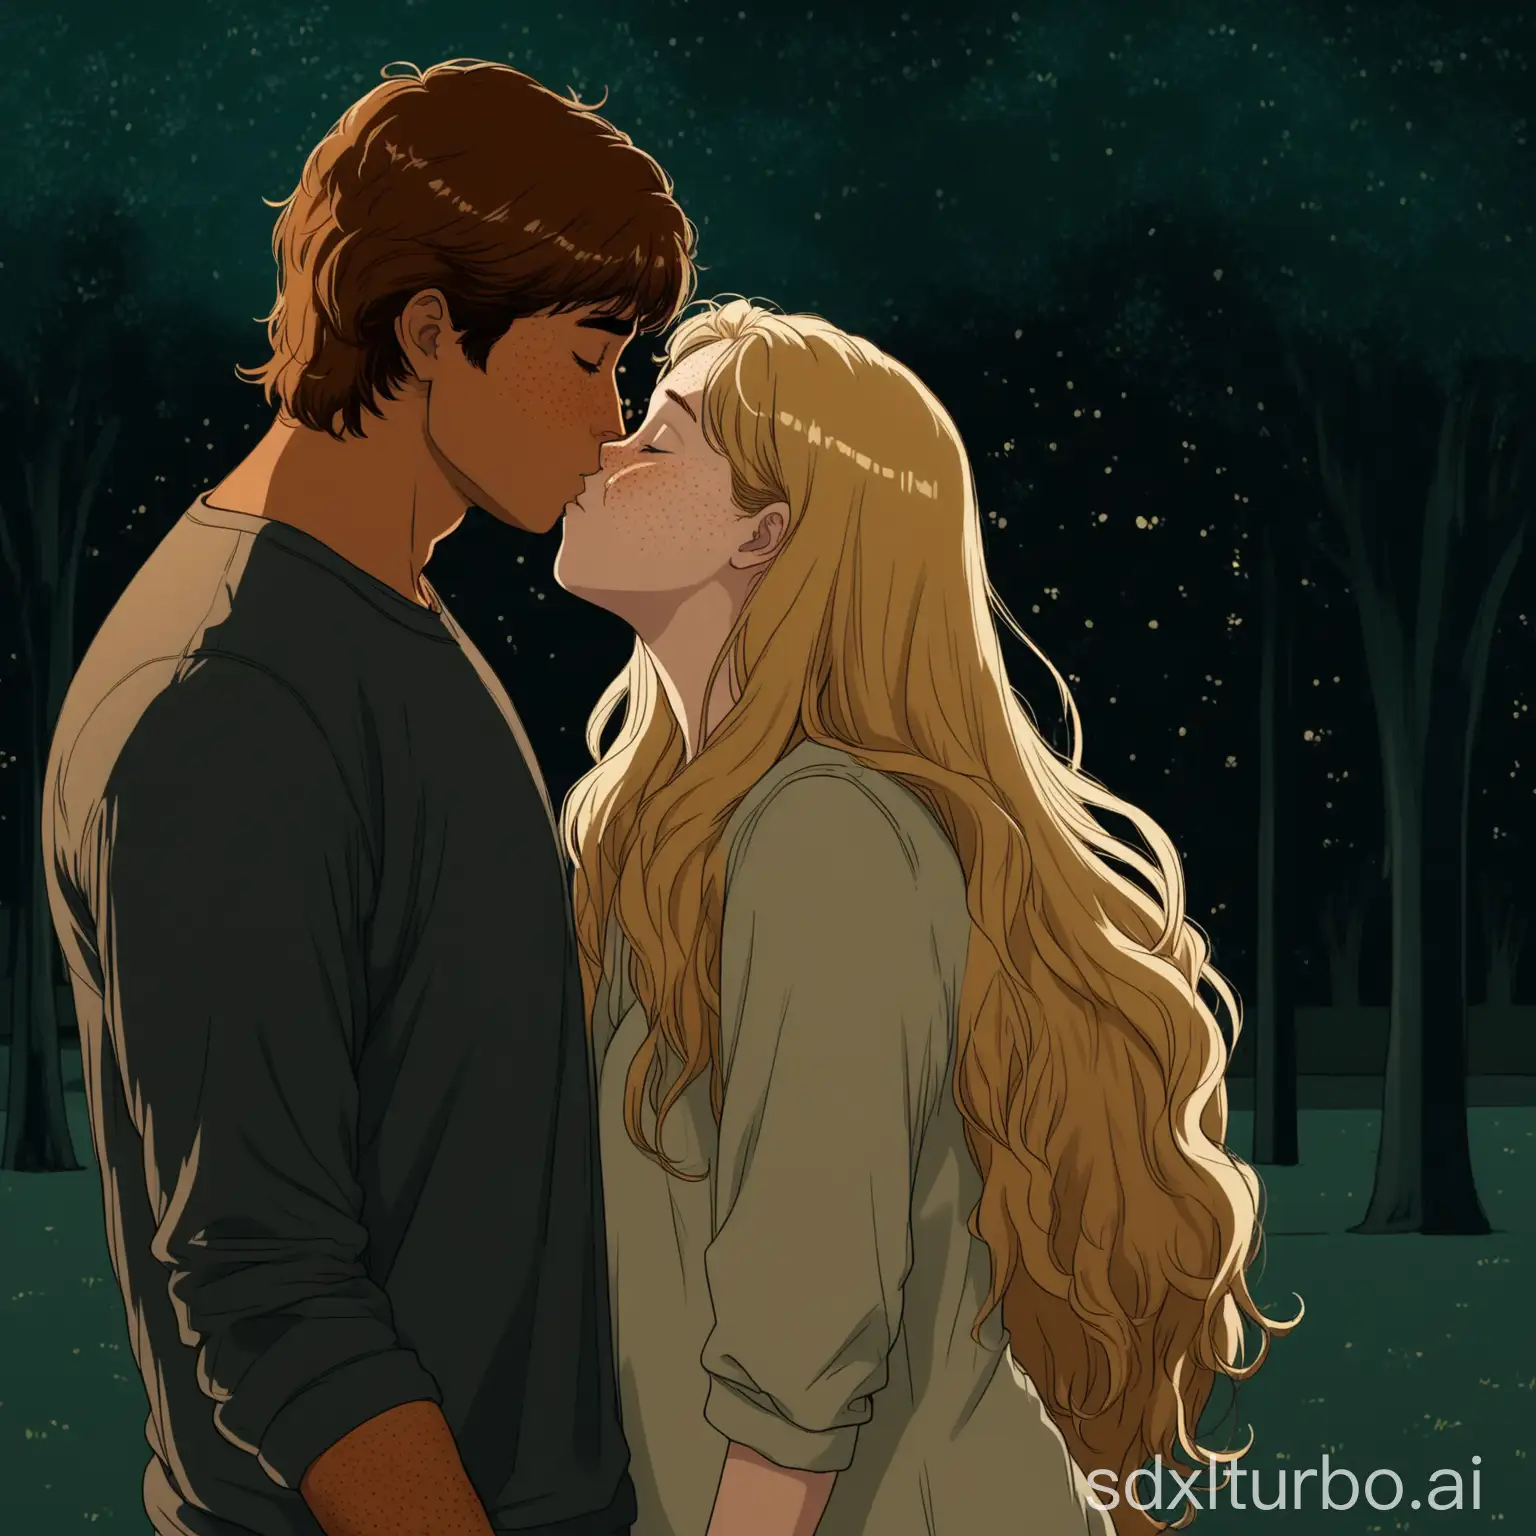 a handsome tall tanned chubby and young man, brown mullet hair kissing a low stature blonde girl with frizzy long hair and bangs, freckles, both closing eyes, in a dark park, full view